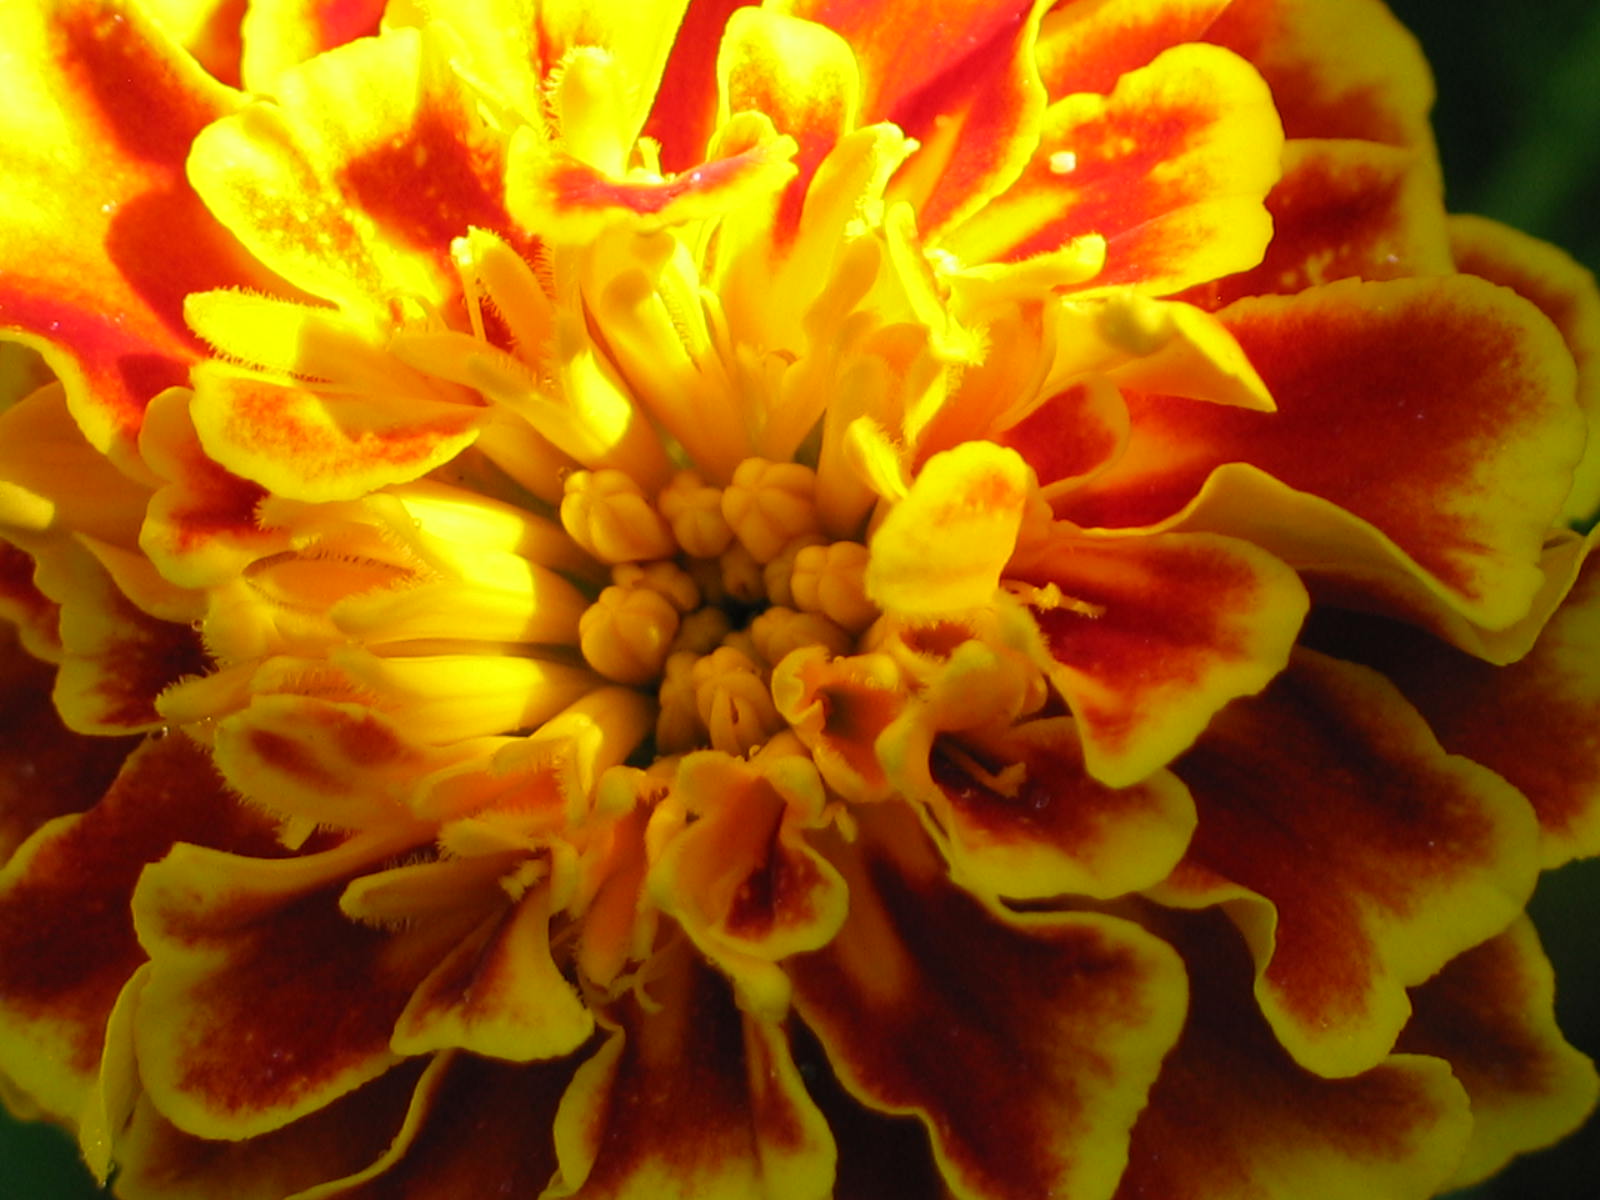 Companion Planting With Marigolds